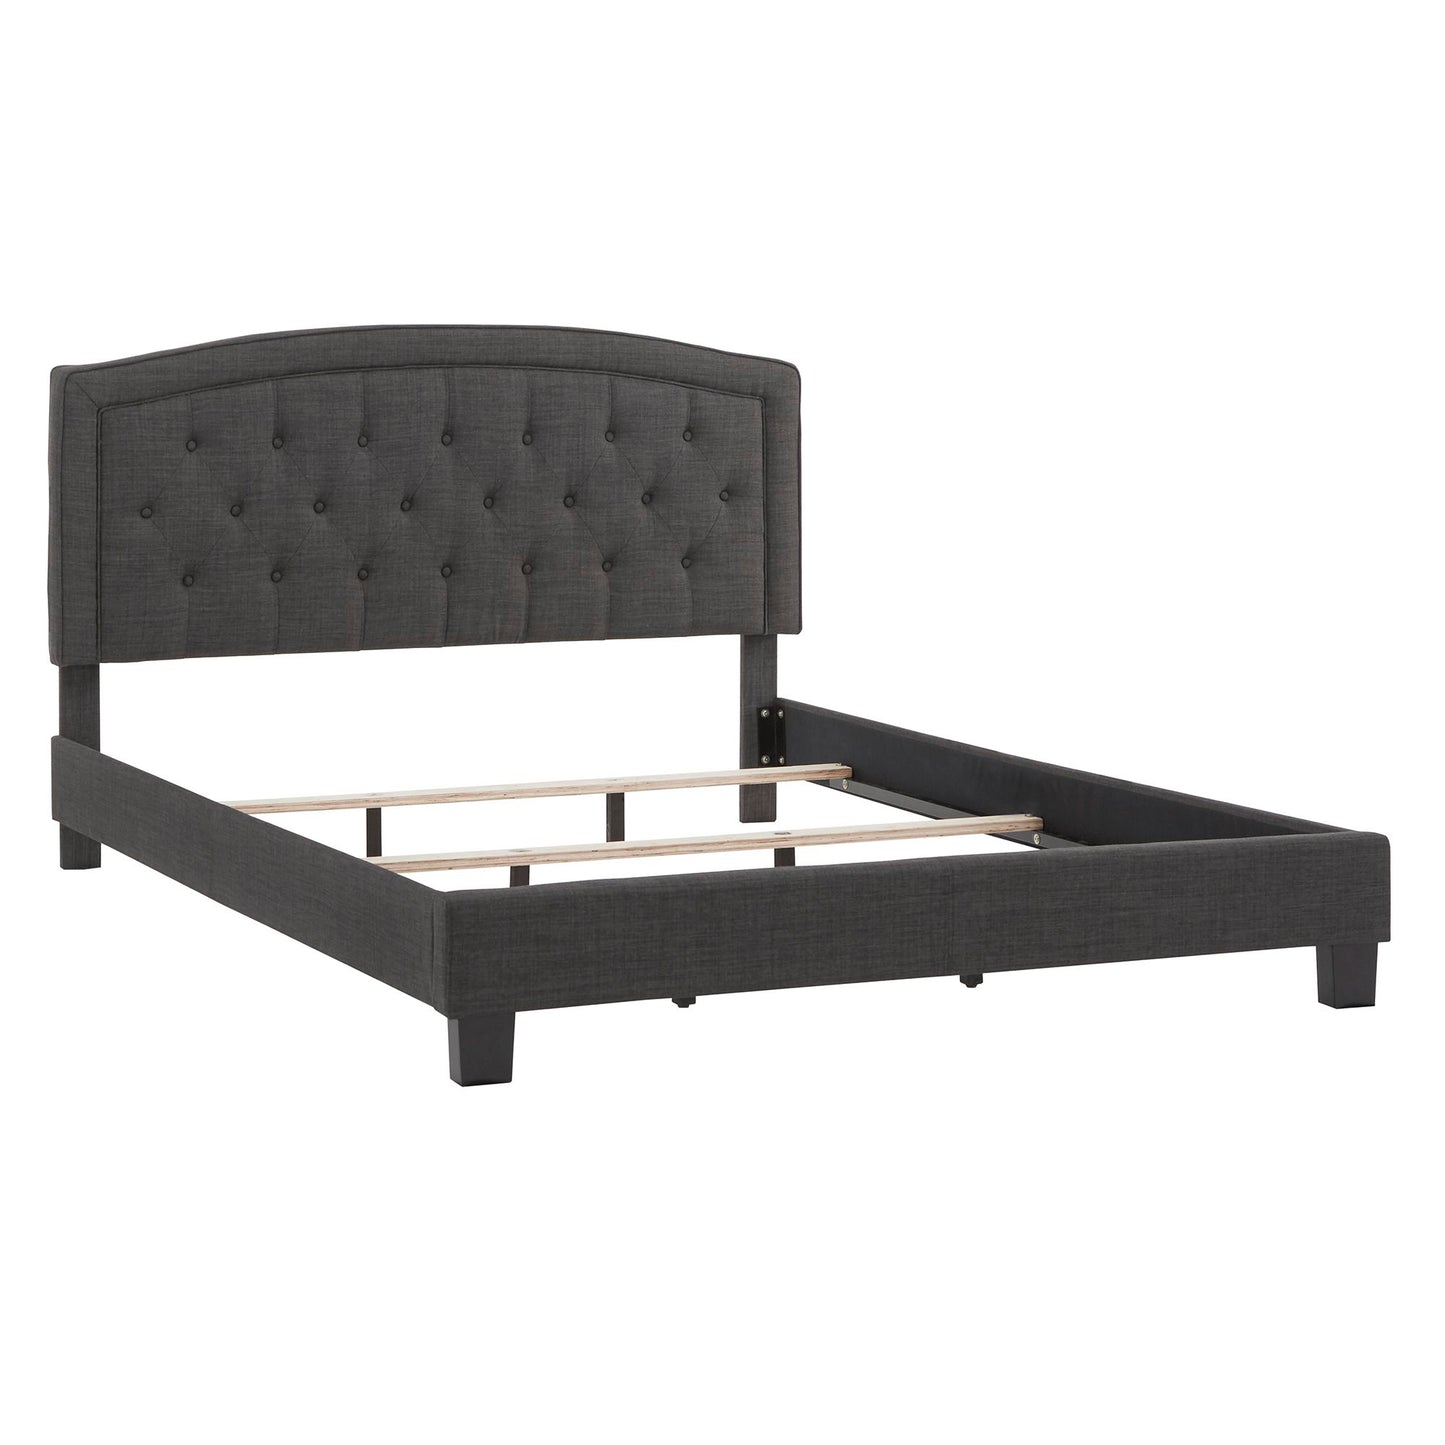 Adjustable Diamond-Tufted Arch-Back Bed - Charcoal, Queen